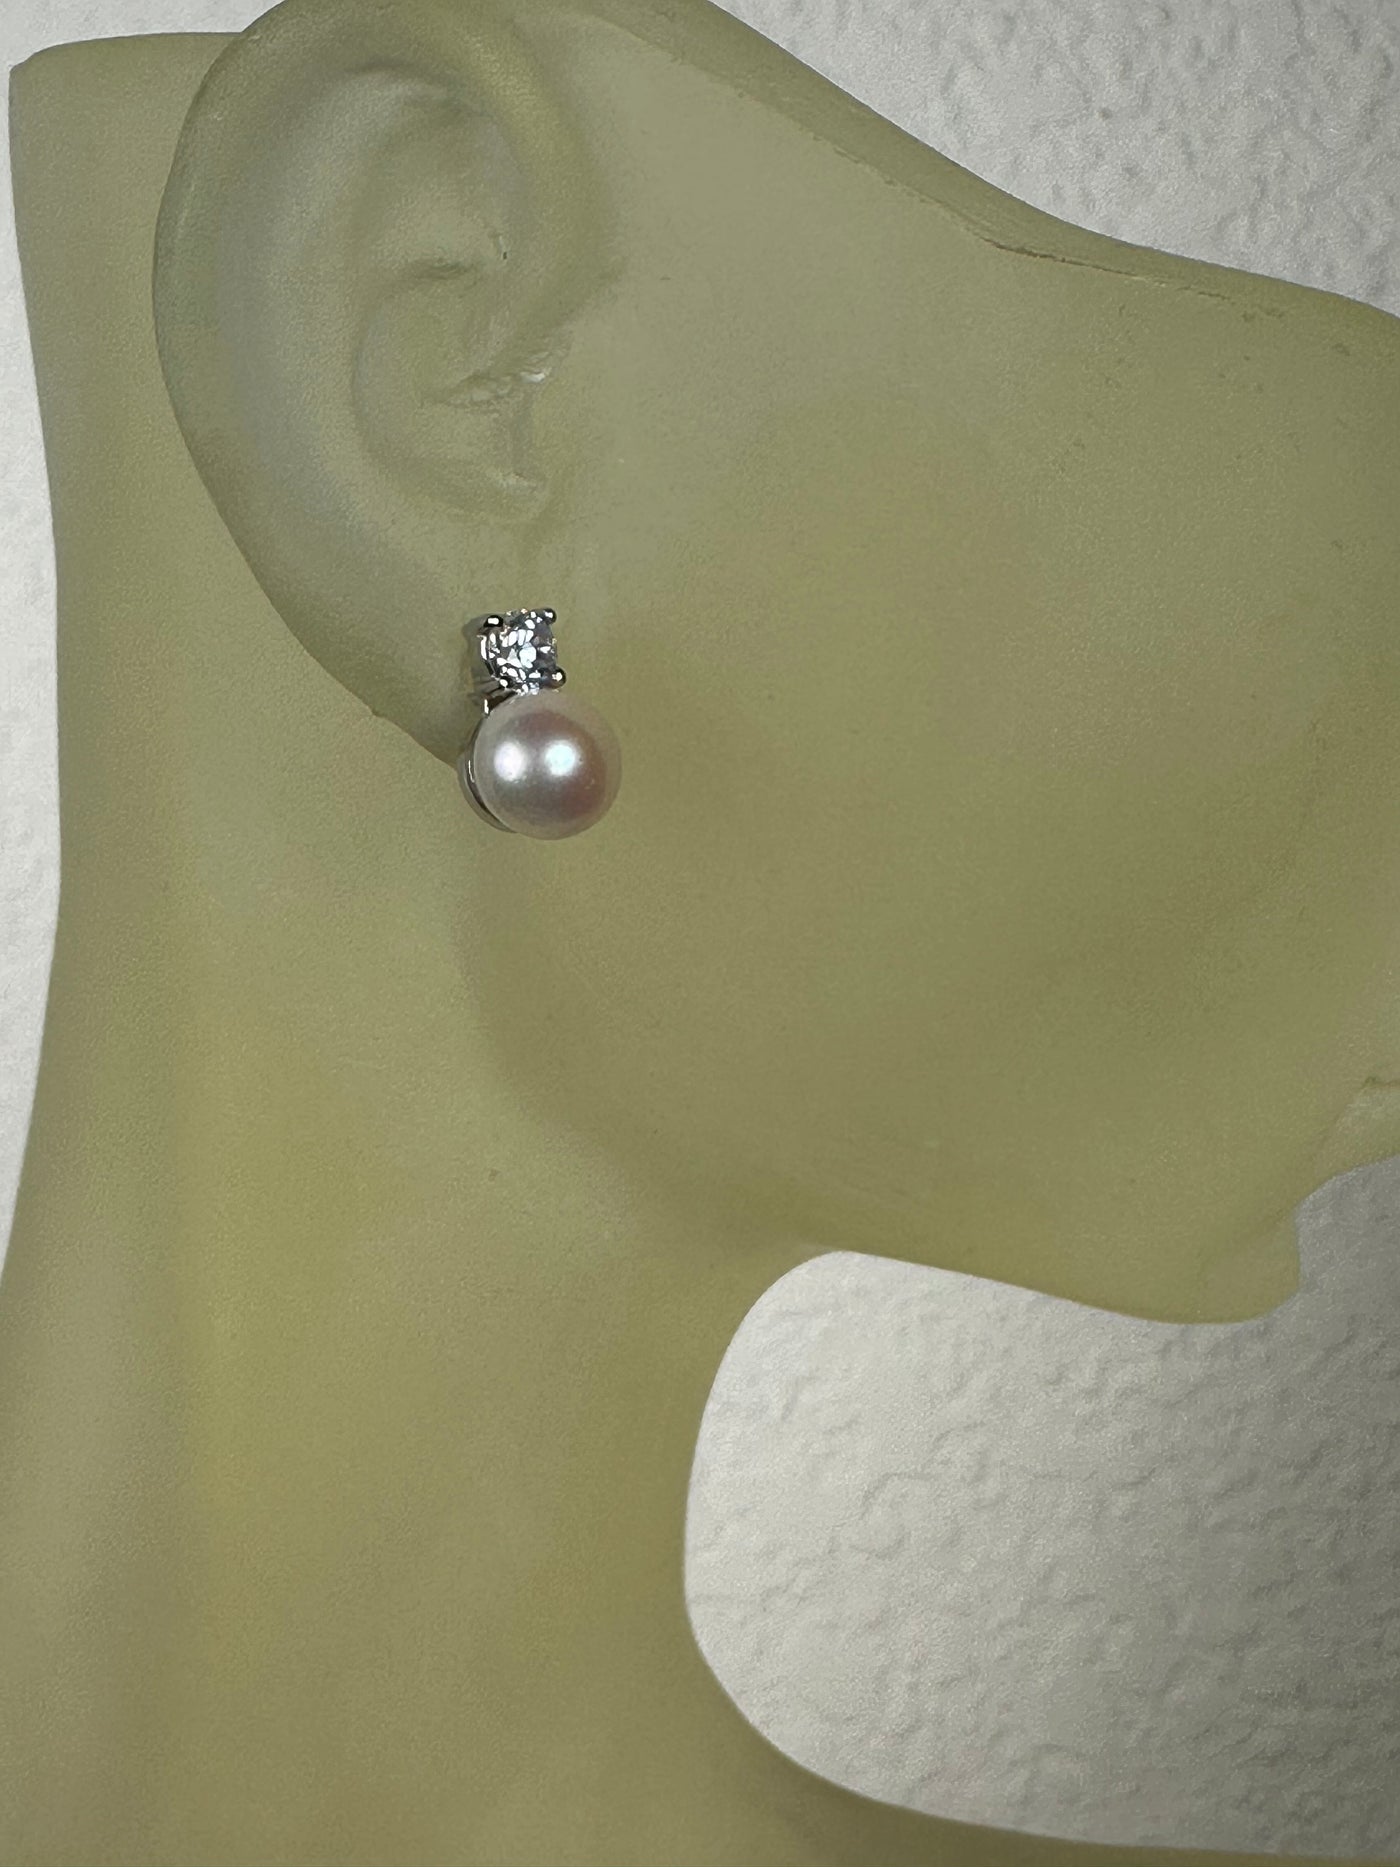 7mm Pearl Stud Earrings with CZ in Sterling Silver on Post